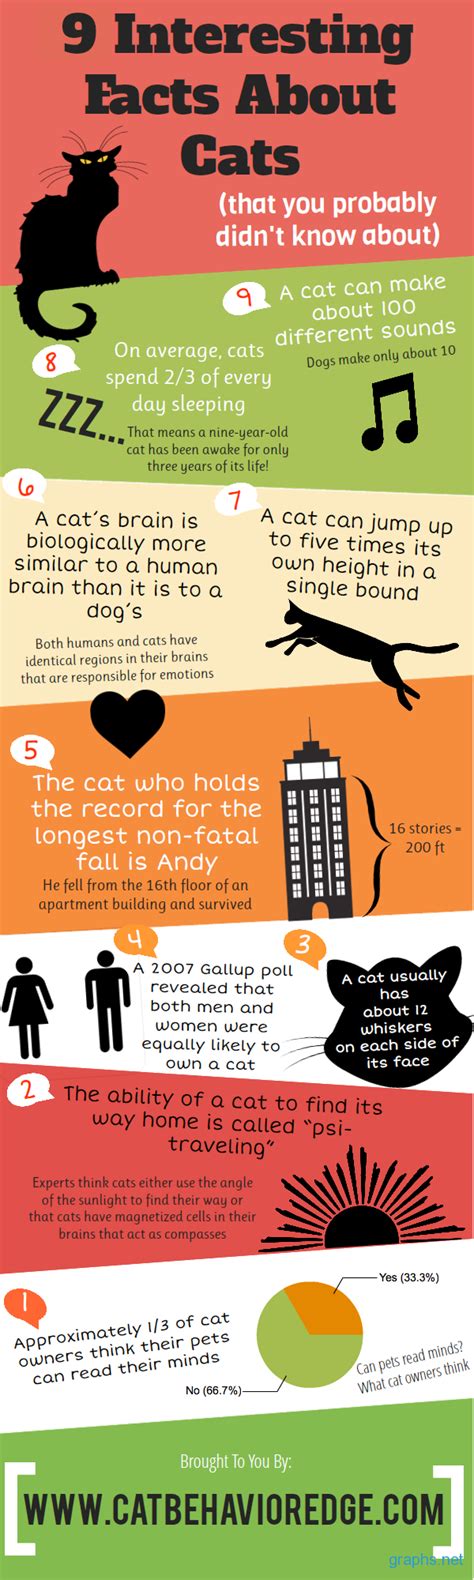 Fun shark facts for kids including photos and printable activity worksheets; 9 Amazing Facts About Cats - Infographics | Graphs.net